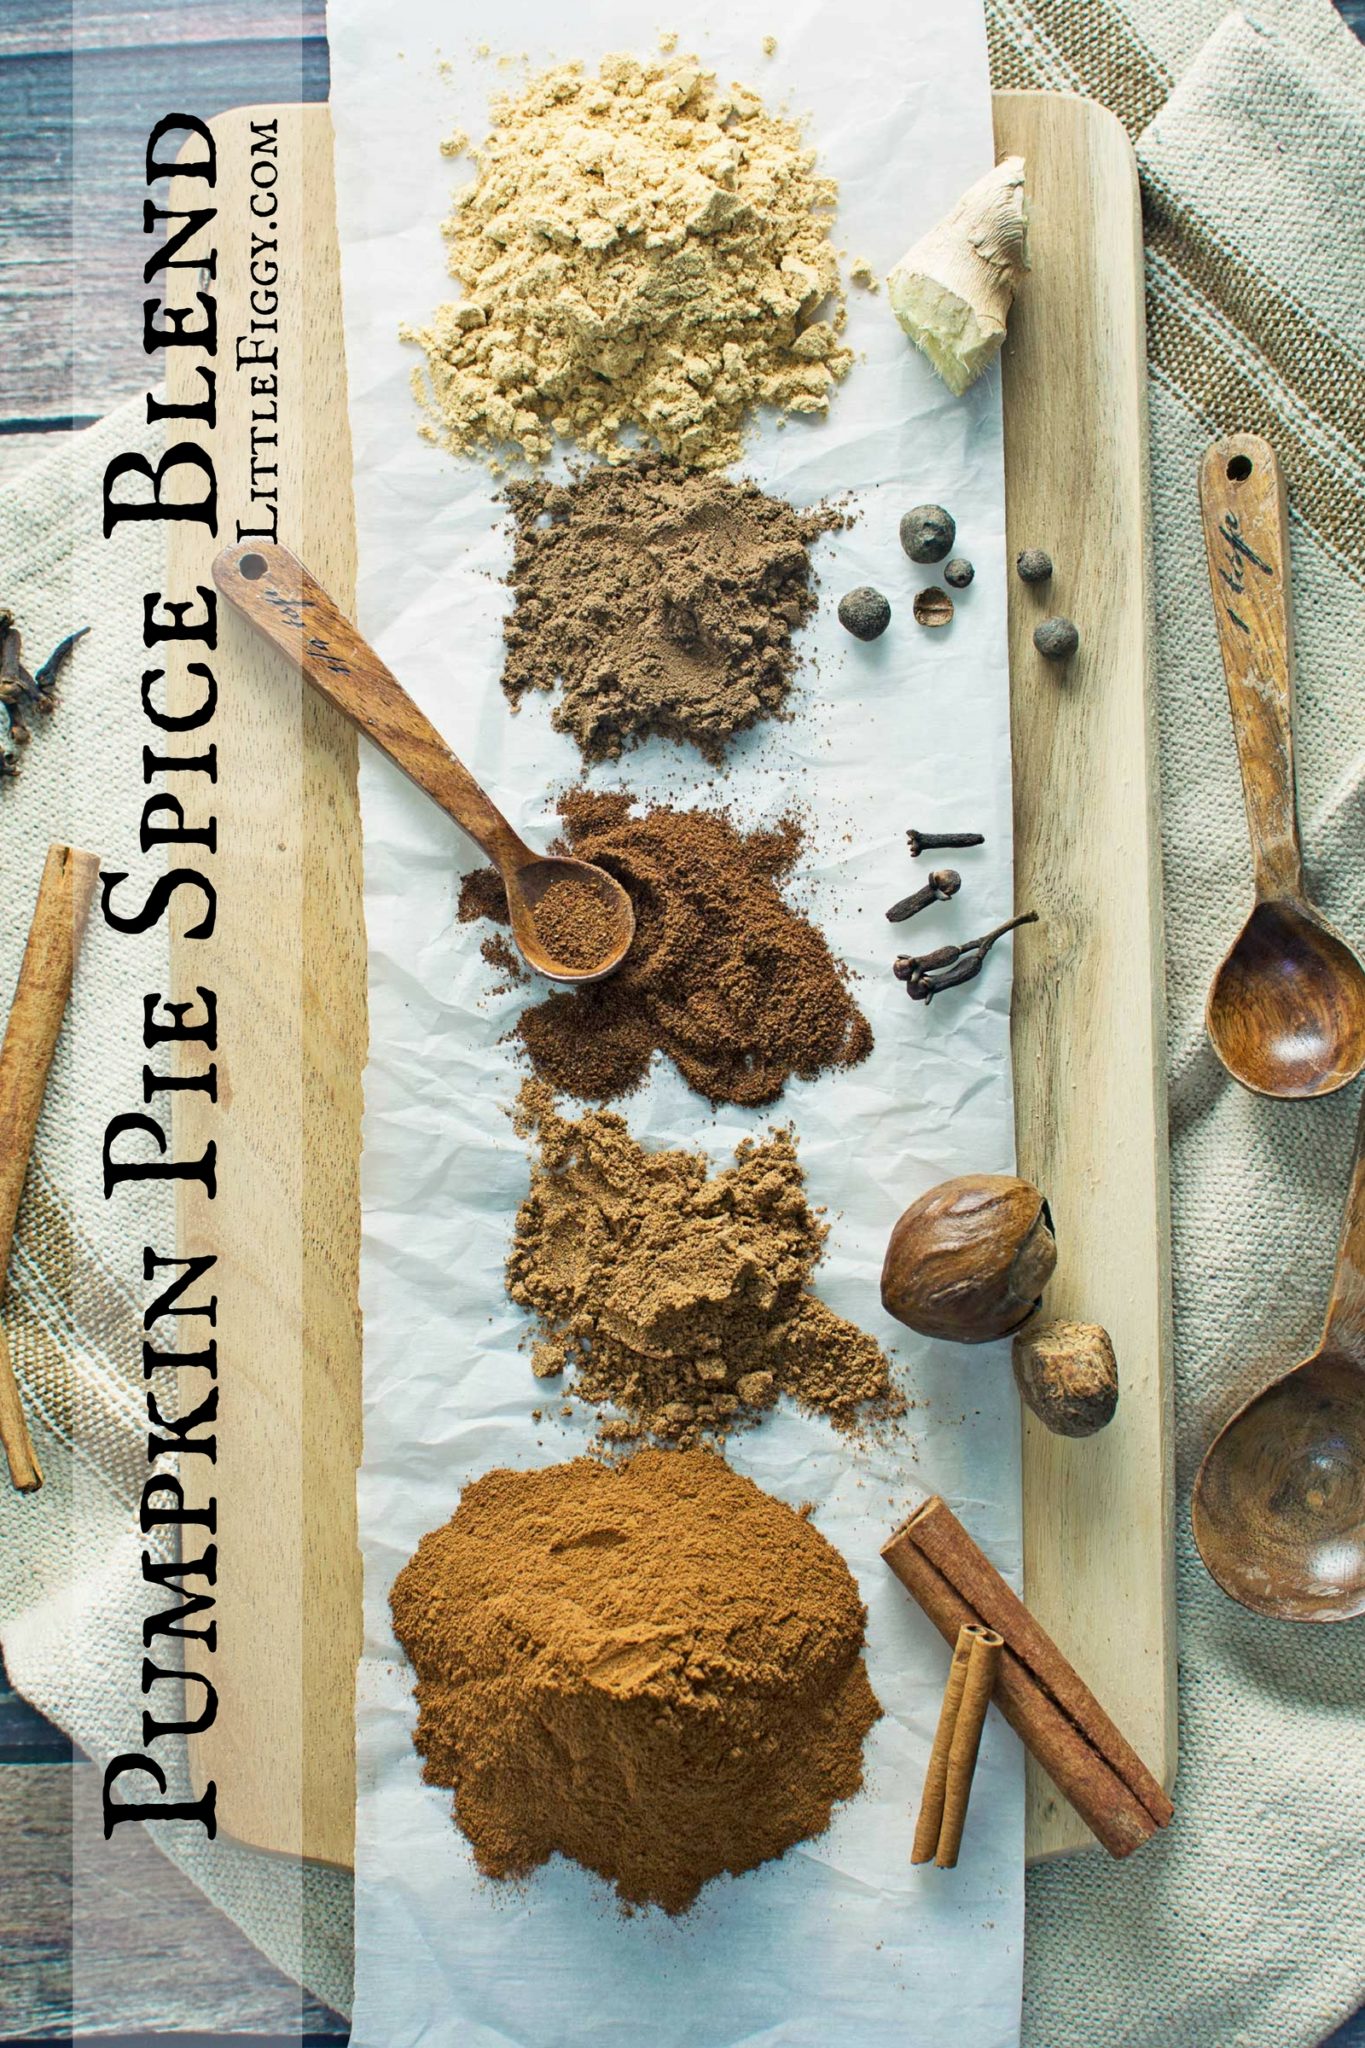 Pumpkin Pie Spice Blend, so easy to make and is perfect for all of your favorite traditional and not so traditional fall dishes, from pumpkin pie to curry. Making your own blends also makes for great Gifts from the Kitchen! Recipe @LittleFiggyFood